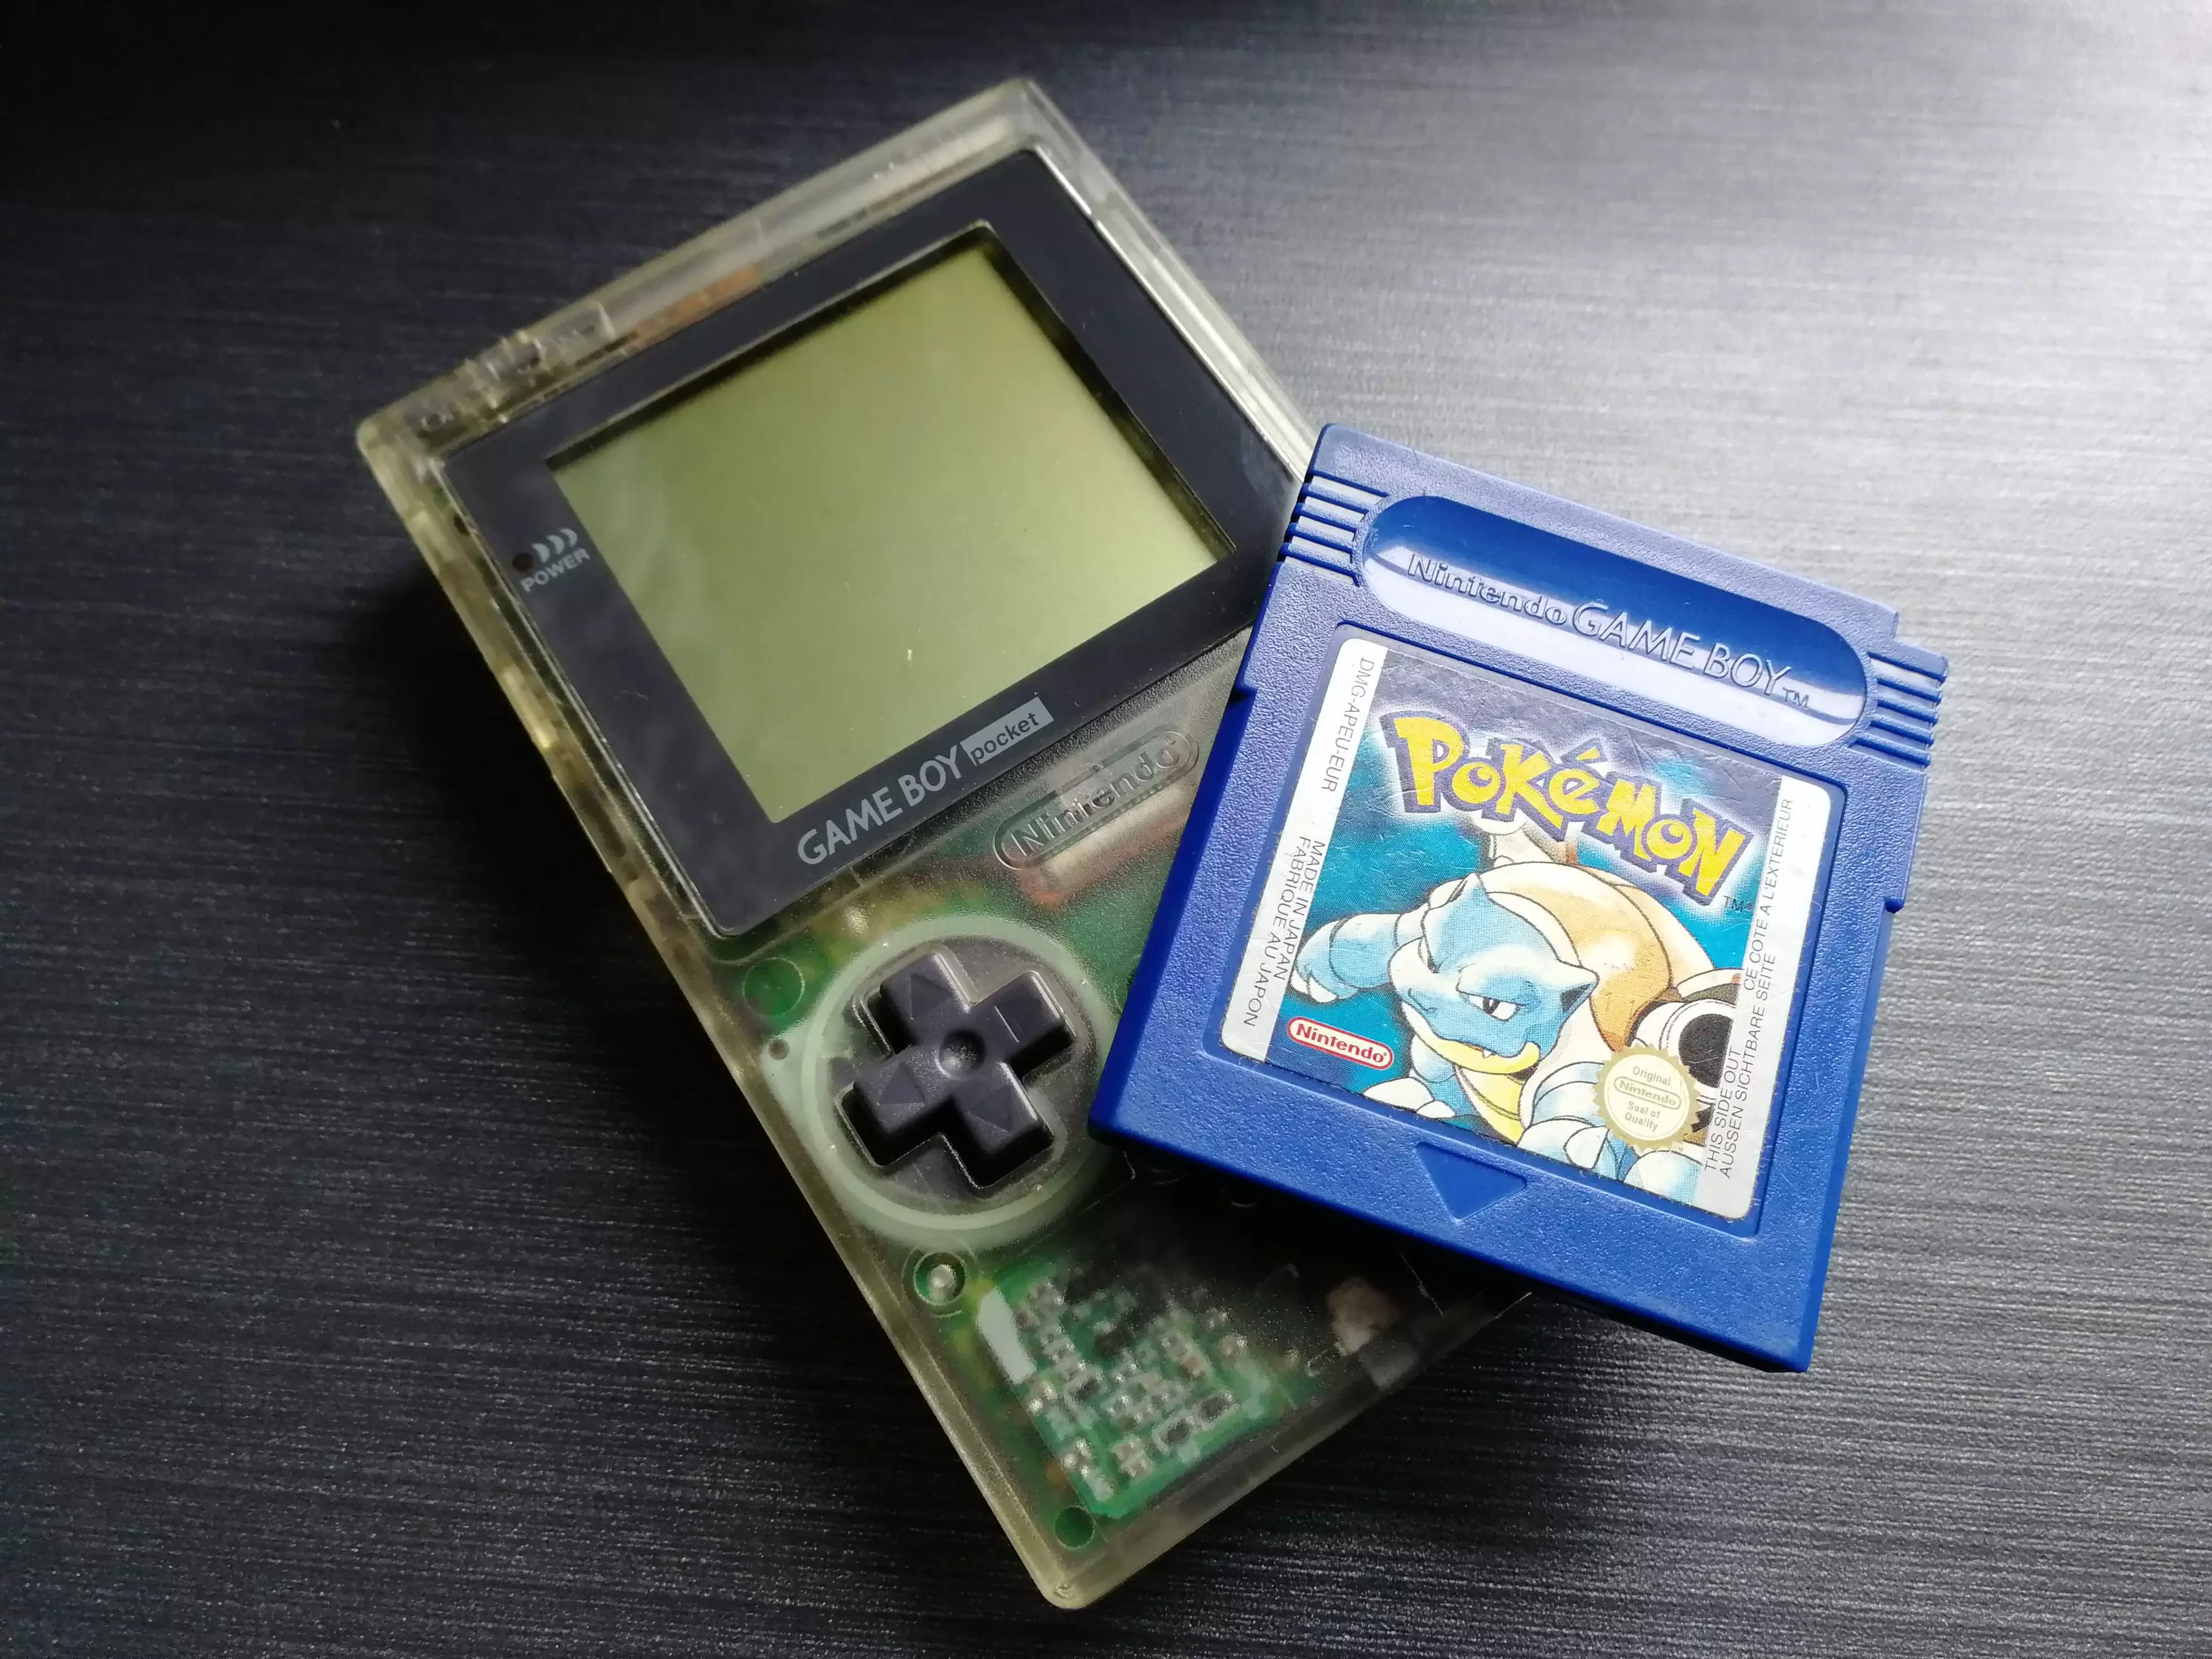 Pokémon Blue (released 1999 in the UK) and a Game Boy Pocket /